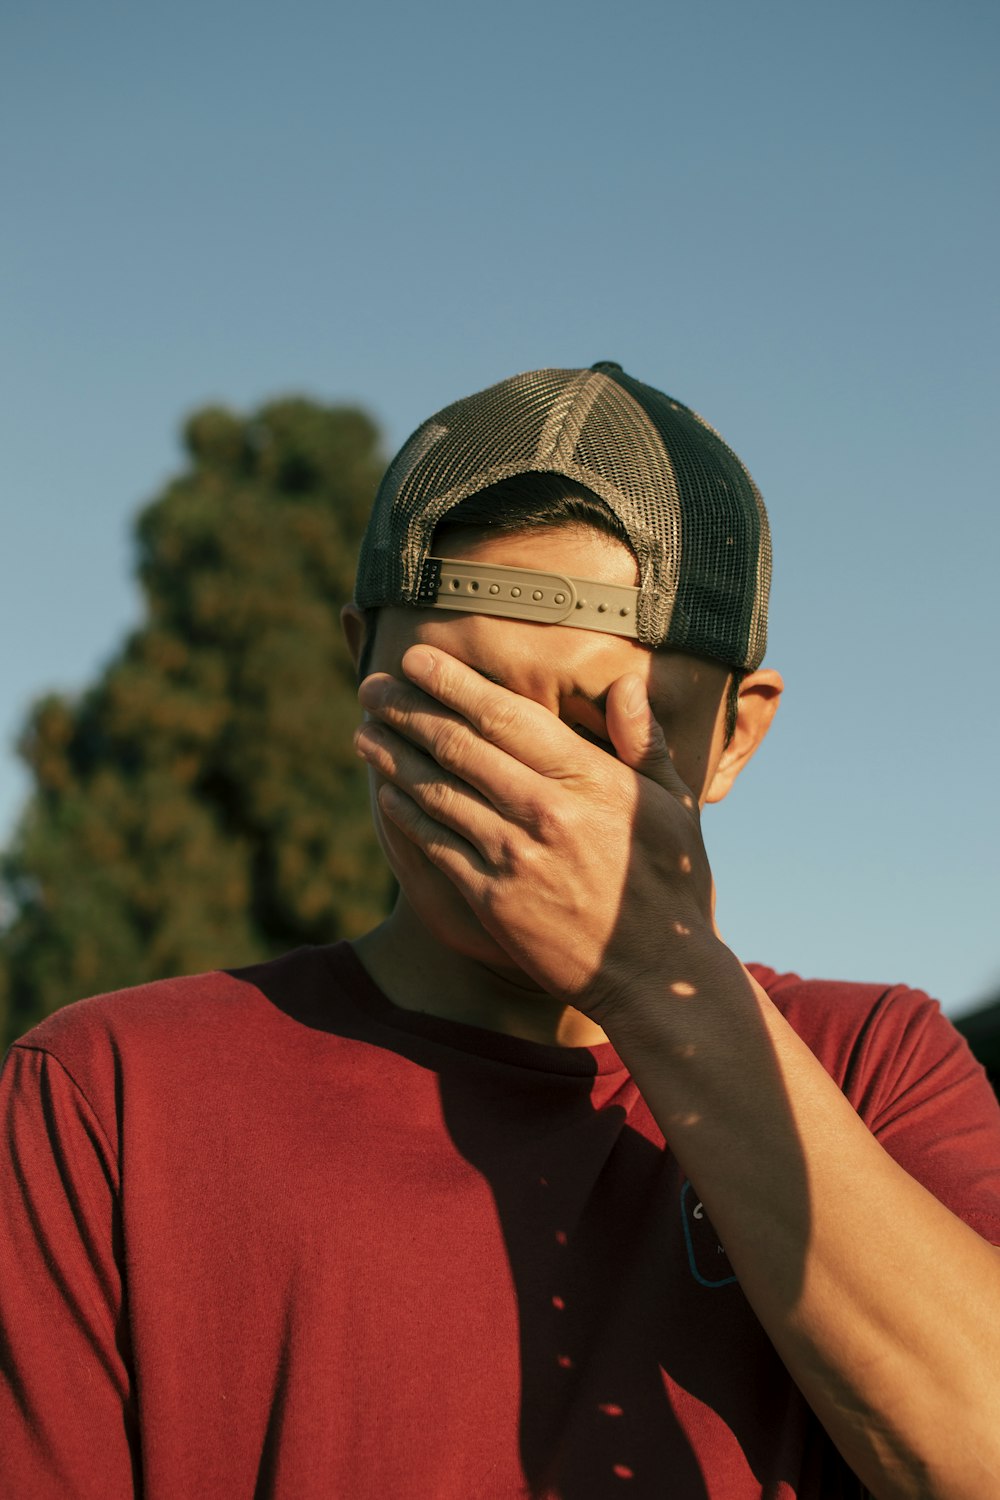 man covering his face